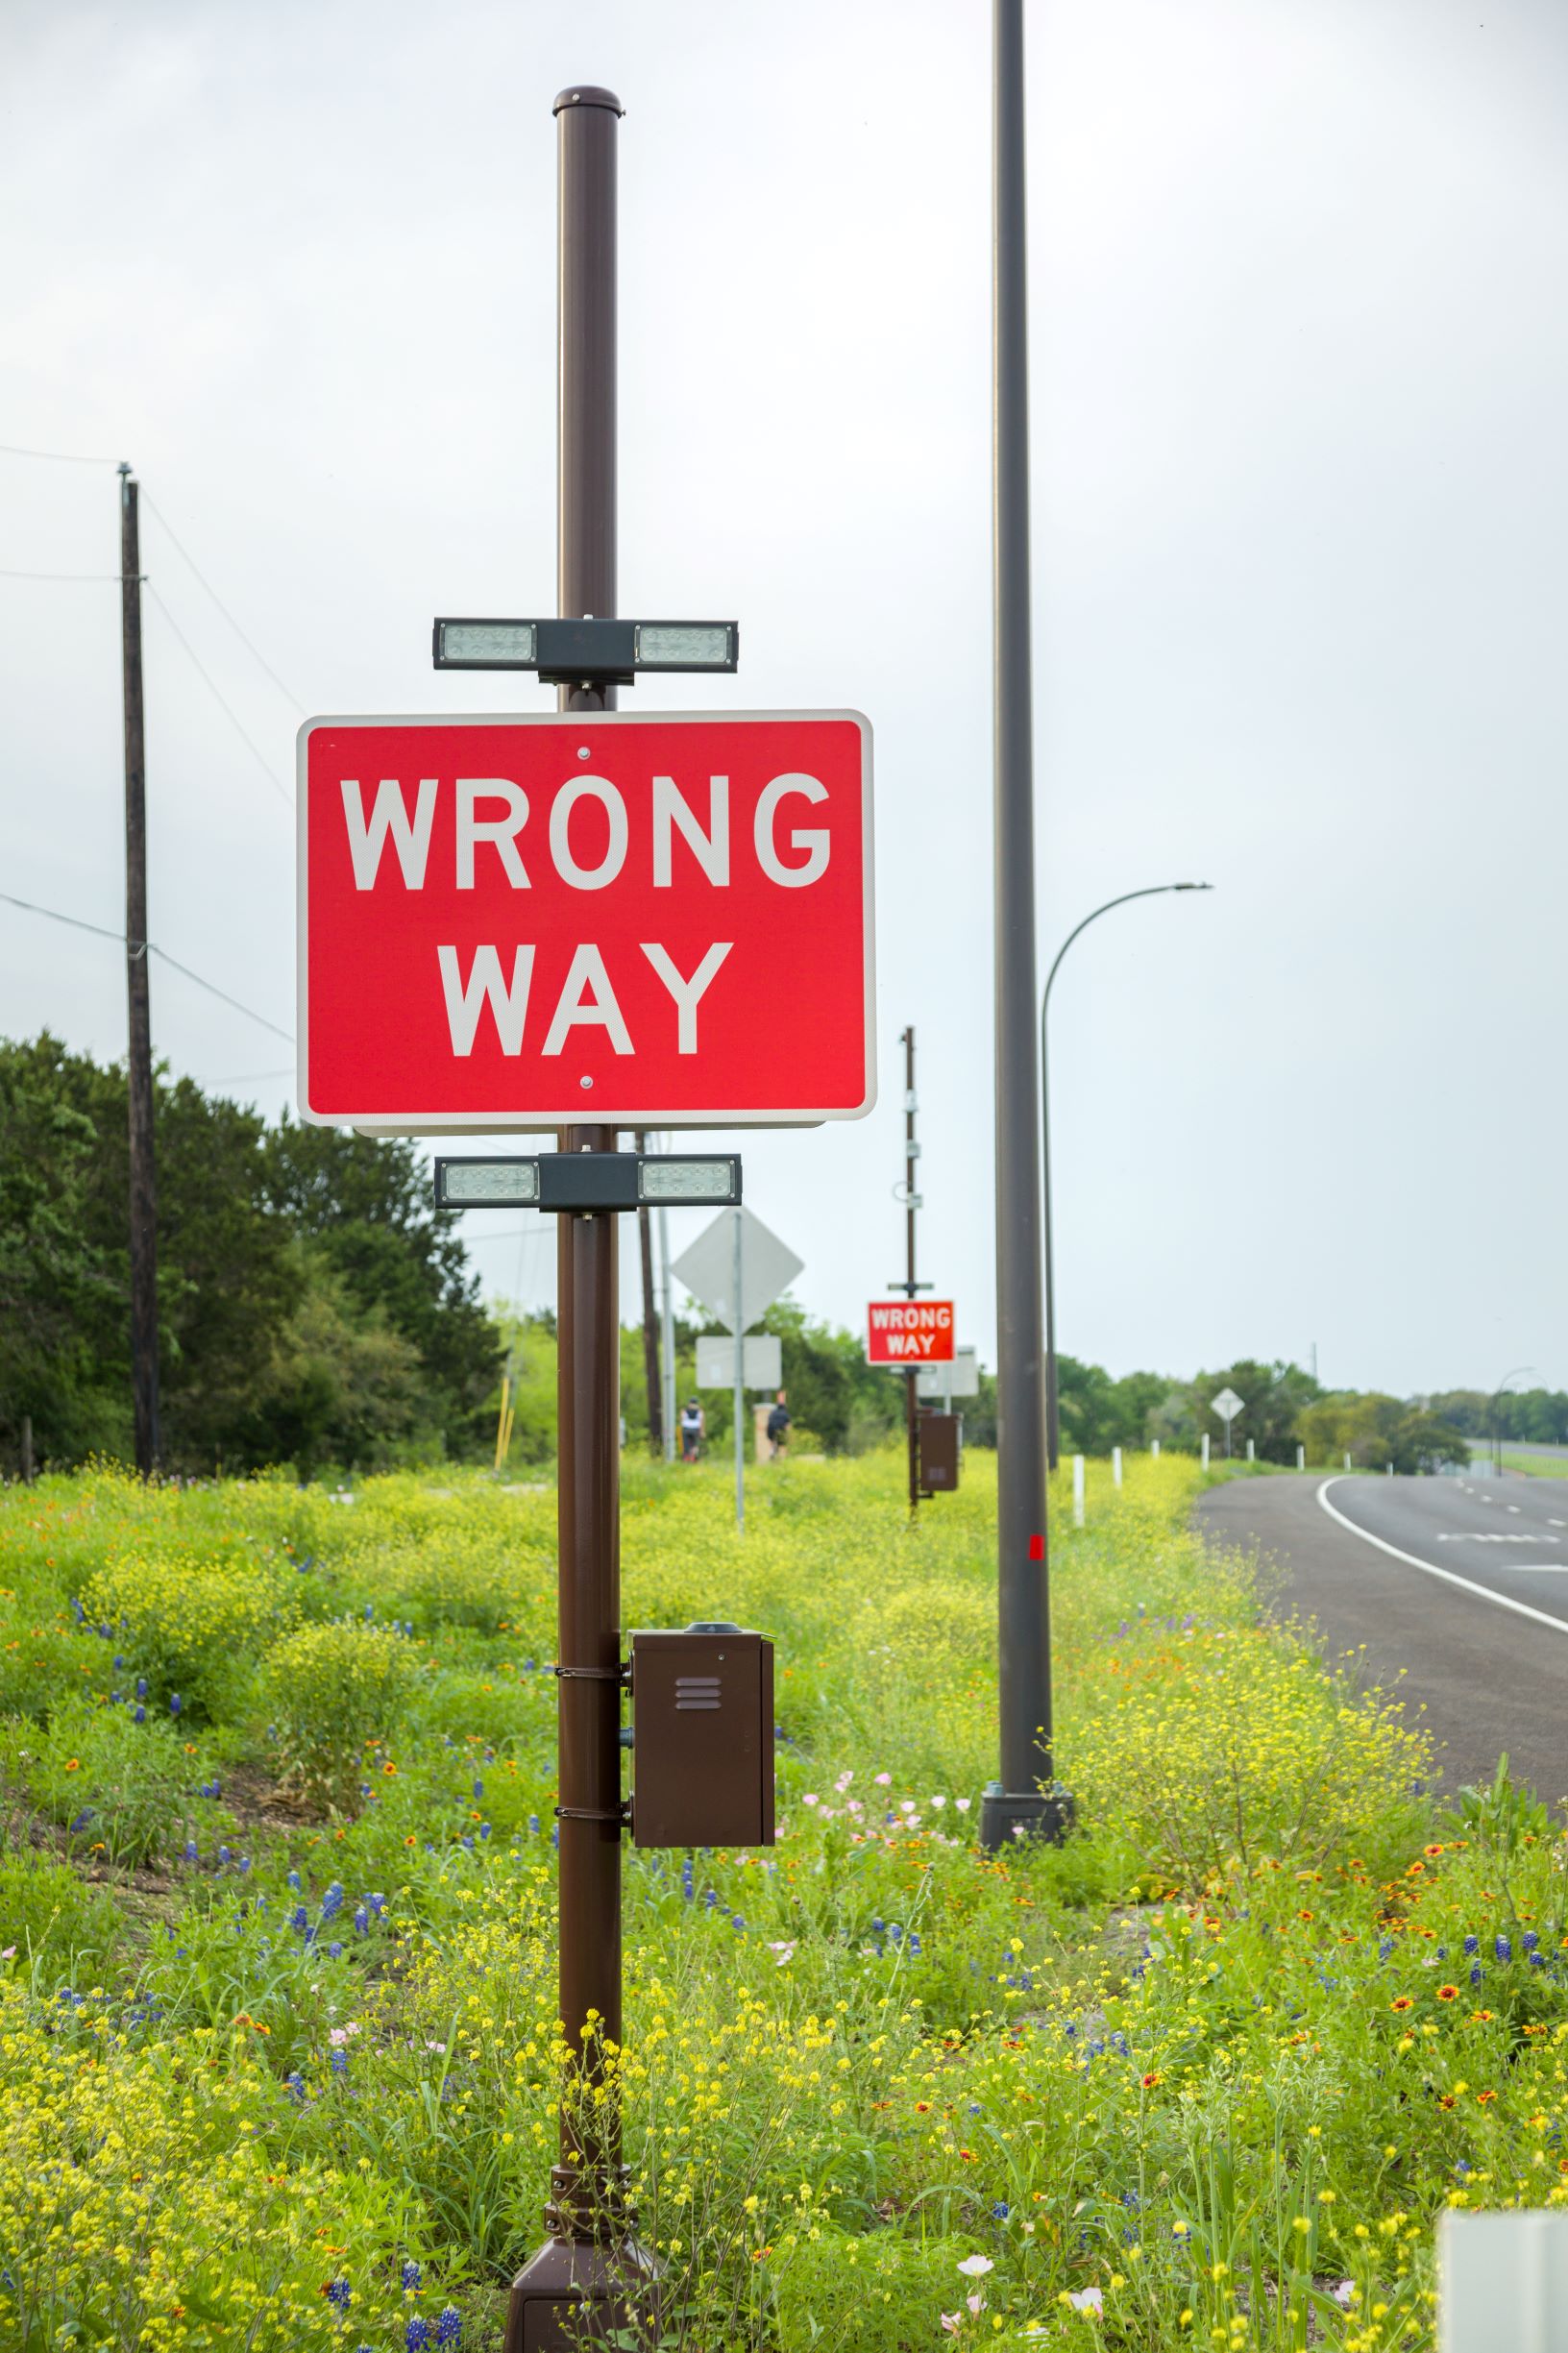 45SW Toll Wrong Way Driving Sign